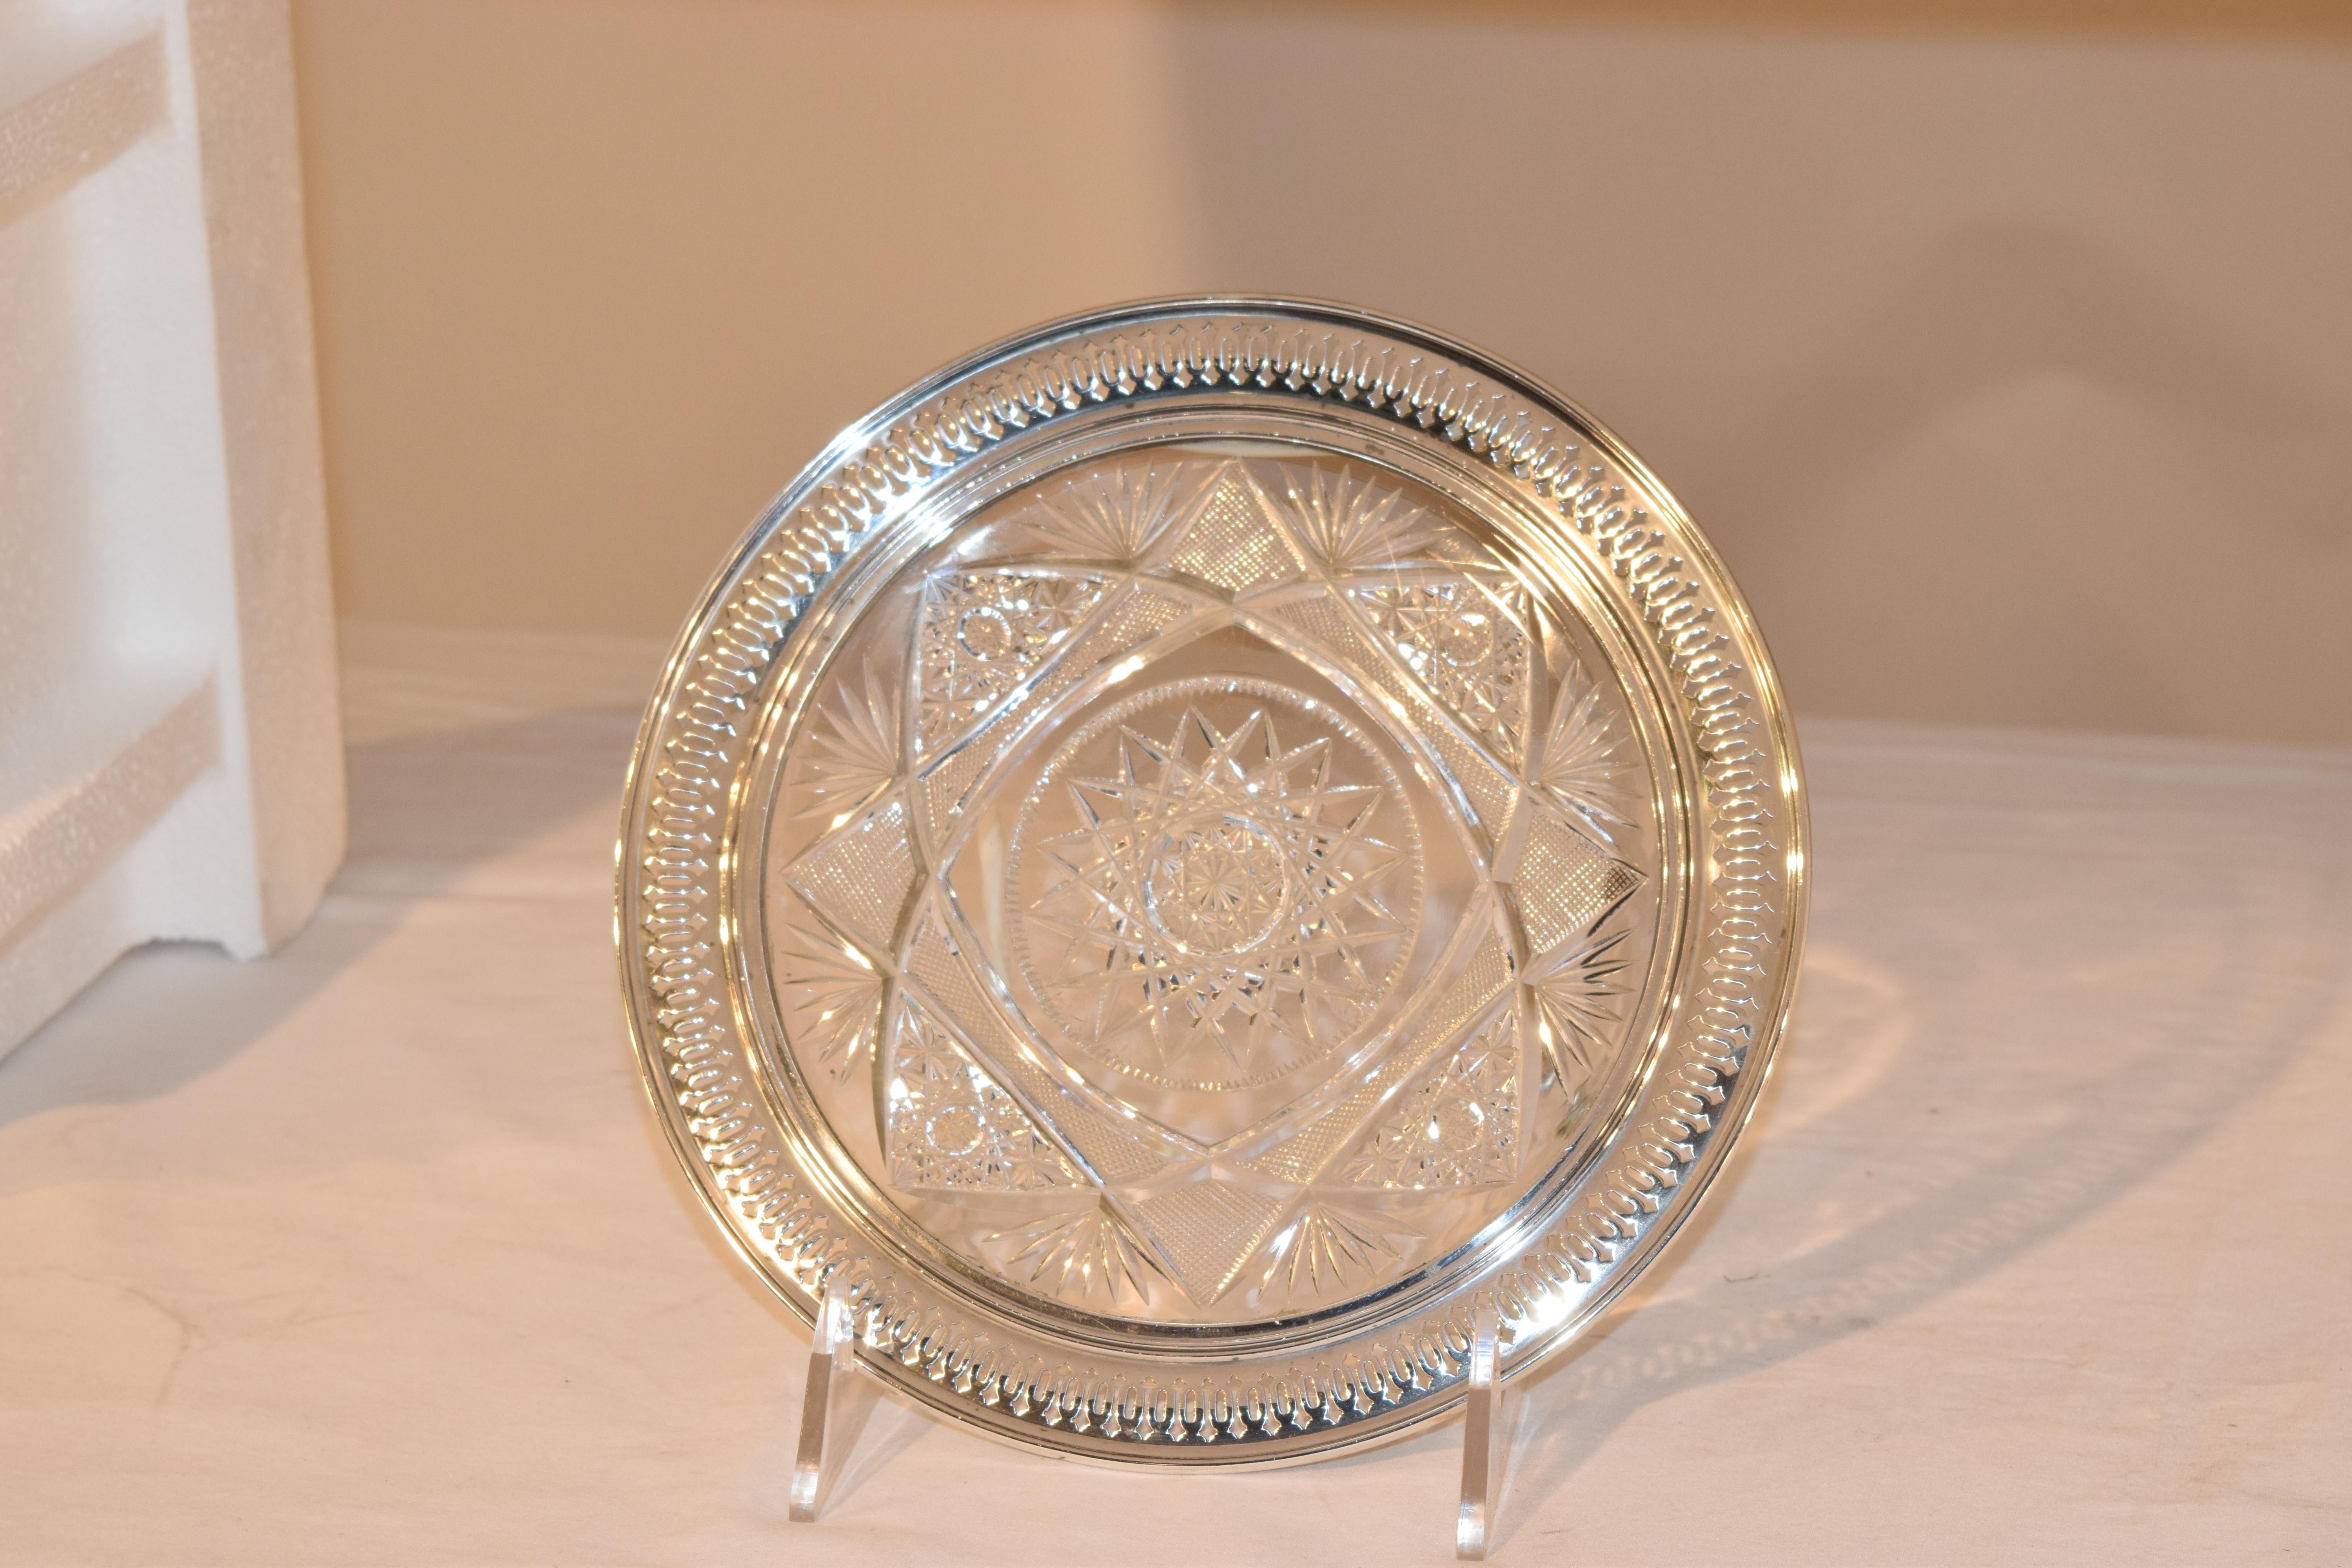 19th century cut glass plate surrounded by a rim of sterling silver, which has a molded edge and piercing. Stamped on the back RW&S, which is R. Wallace and Sons.